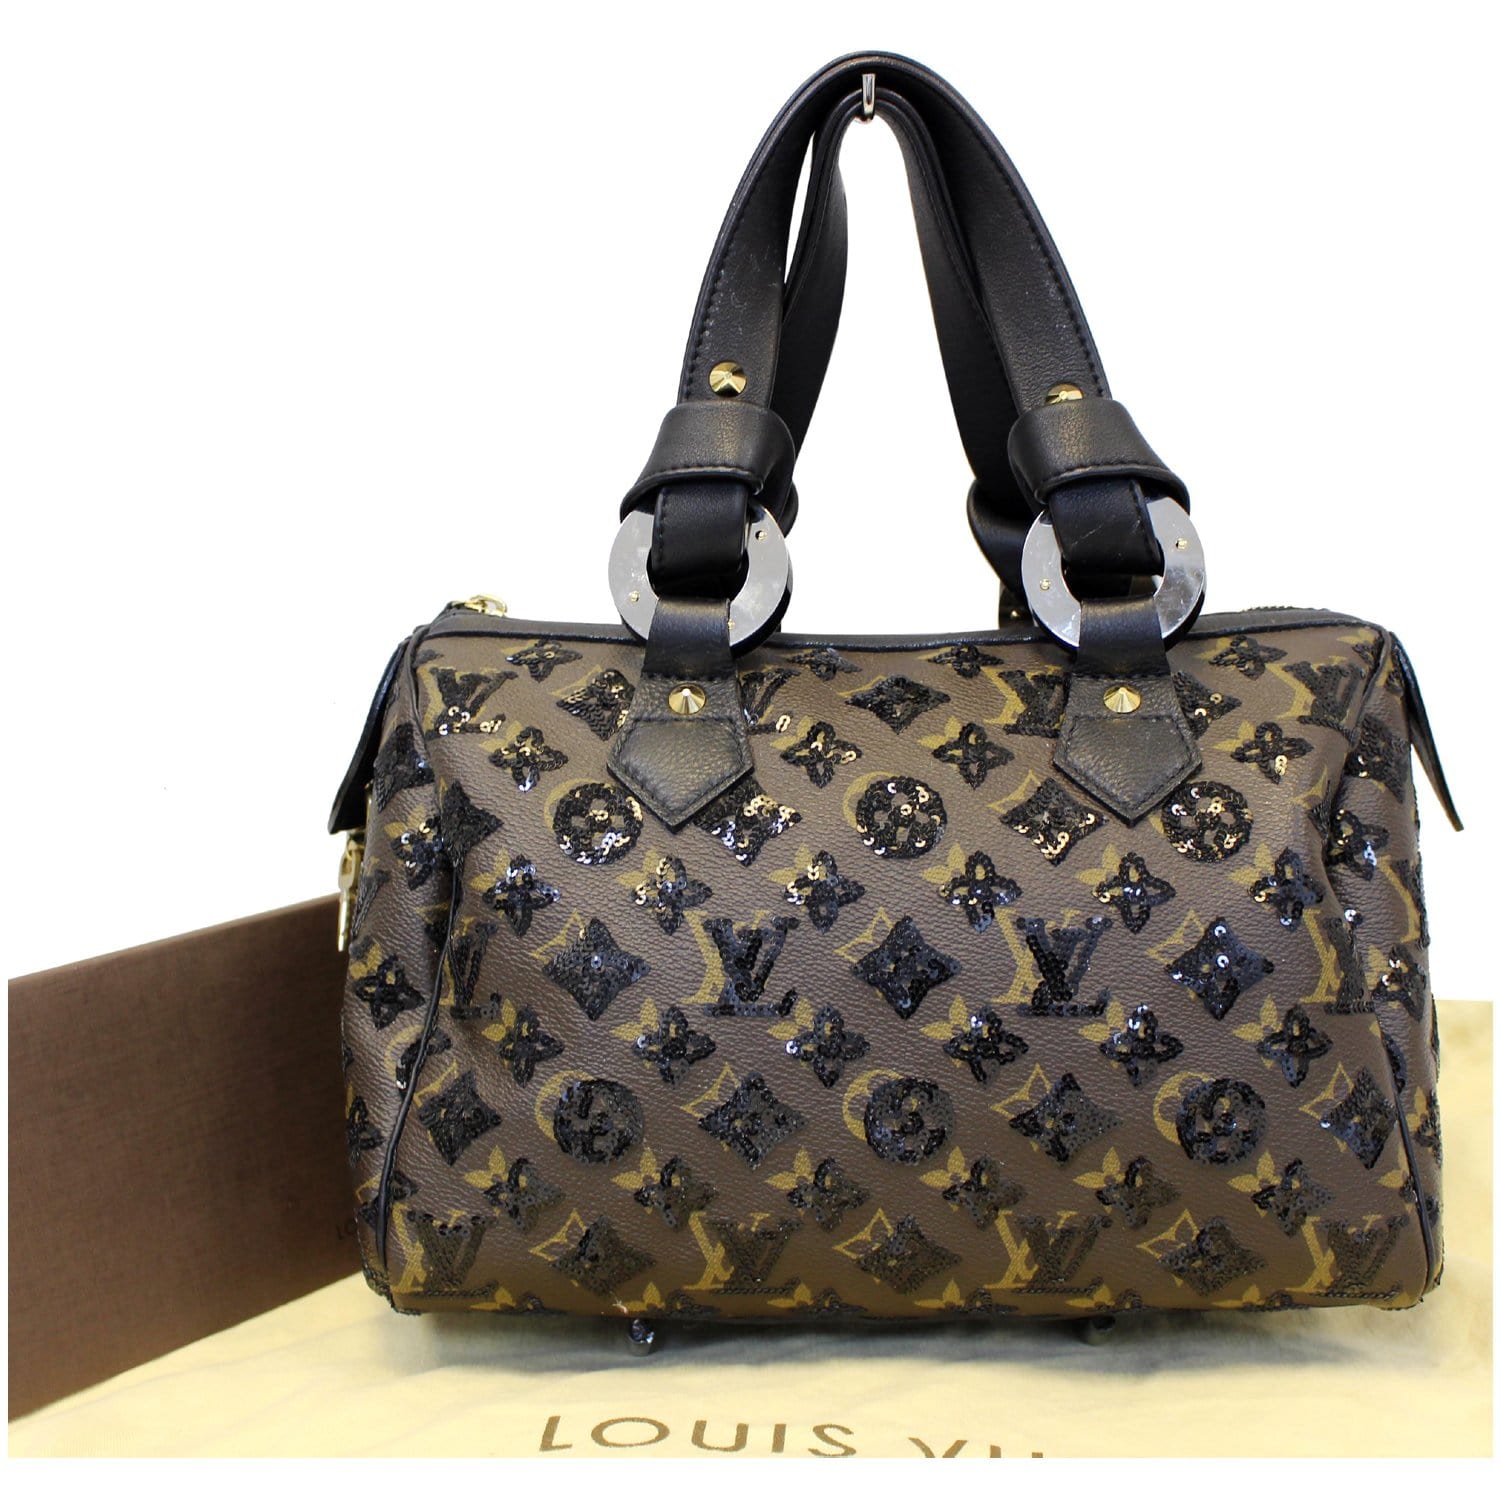 ⭐️SOLD⭐️L O U I S V U I T T O N Speedy - Monogram canvas with black sequin  detail (Like new condition) Size 30 by 23 cm Price $950